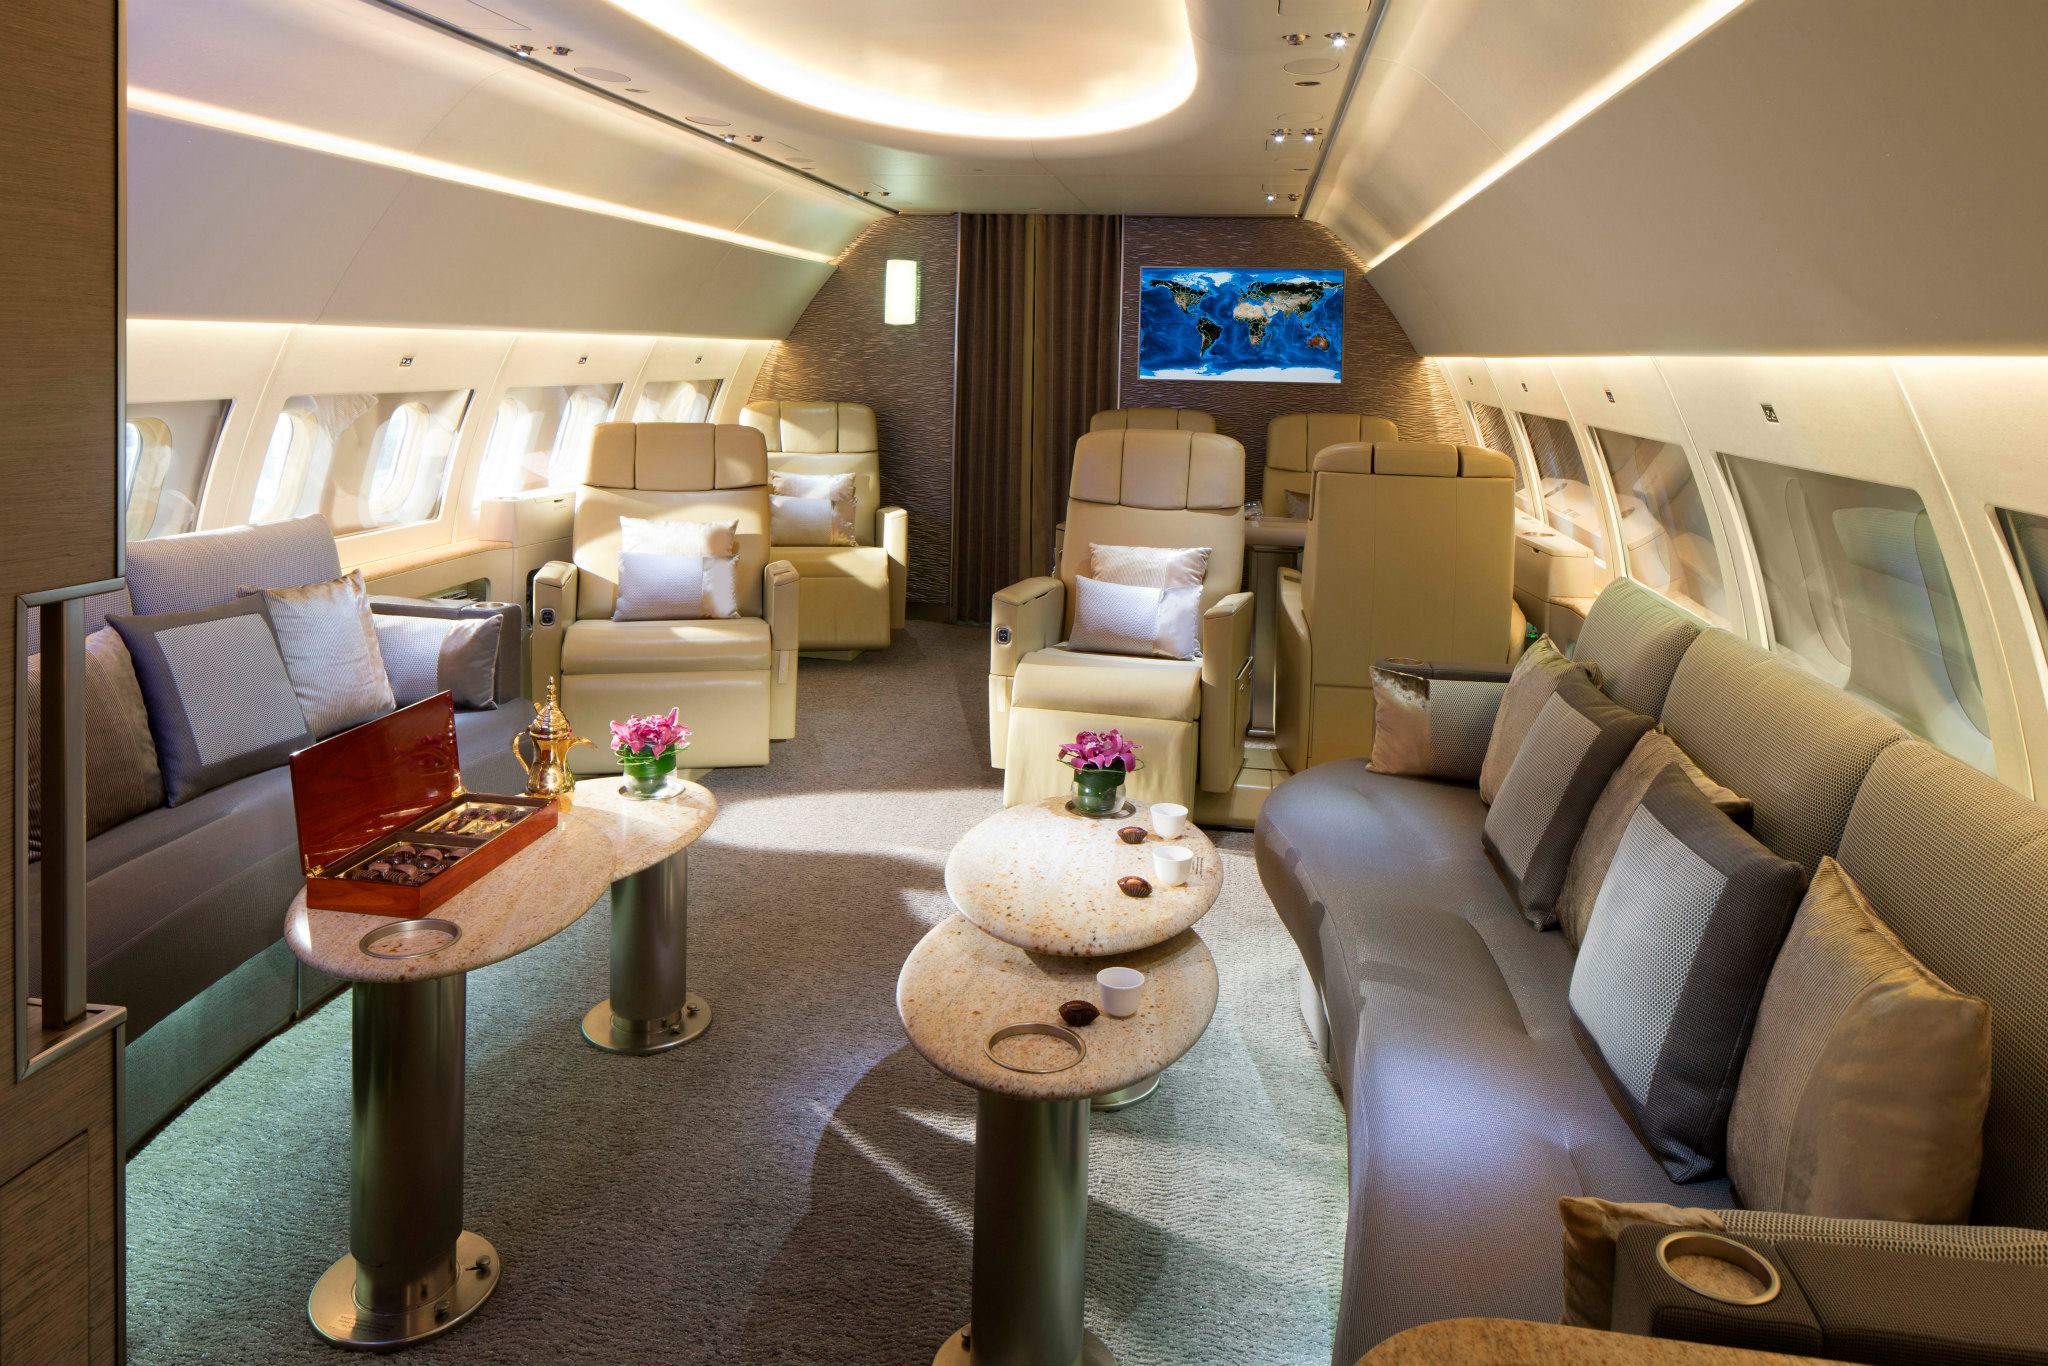 Emirates Executive private jet service takes off with private suites ...